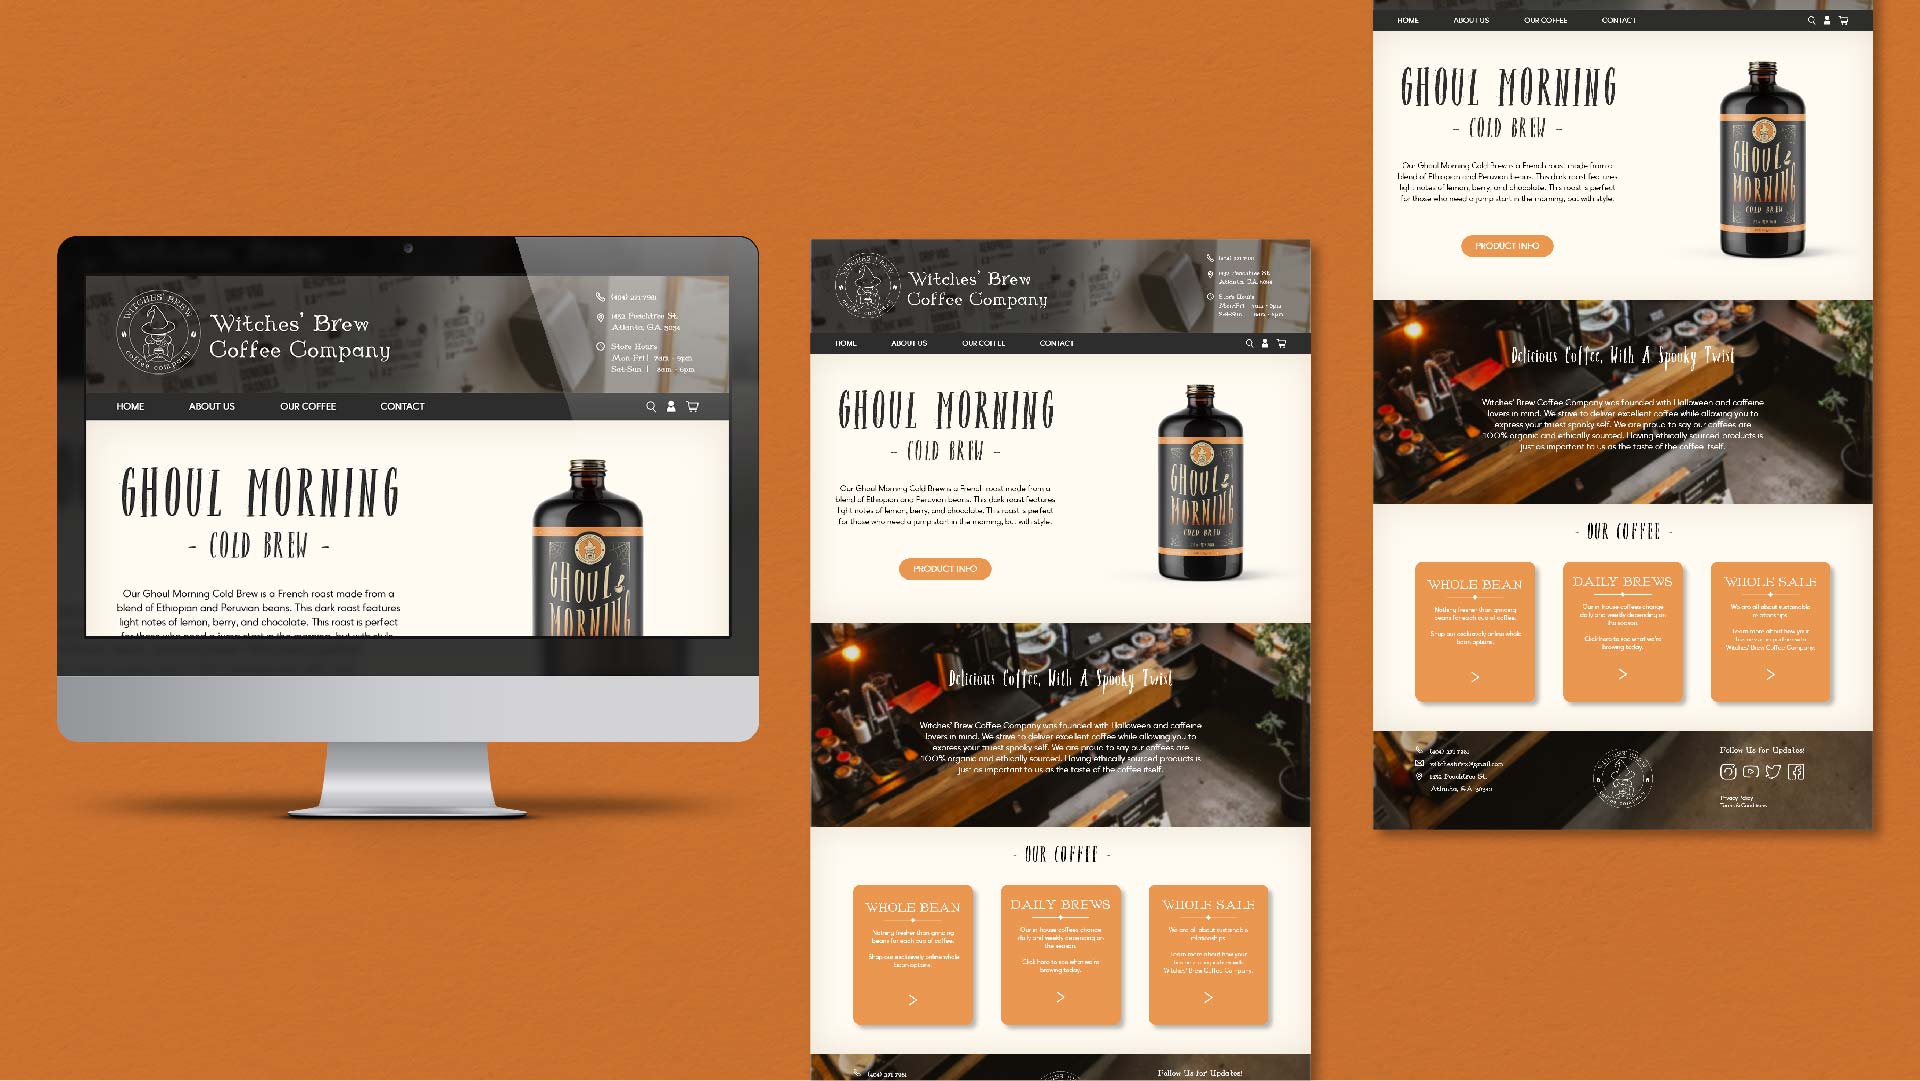 "Witches Brew Coffee Co."  / "Witches Brew Coffee Co." Branding & Desktop Site 1920x1080 pixels, digital 2021. This desktop site gives the viewer an insight into the Witches’ Brew Coffee Co. brand. The home page promotes their bestselling product: Ghoul Morning Cold Brew.